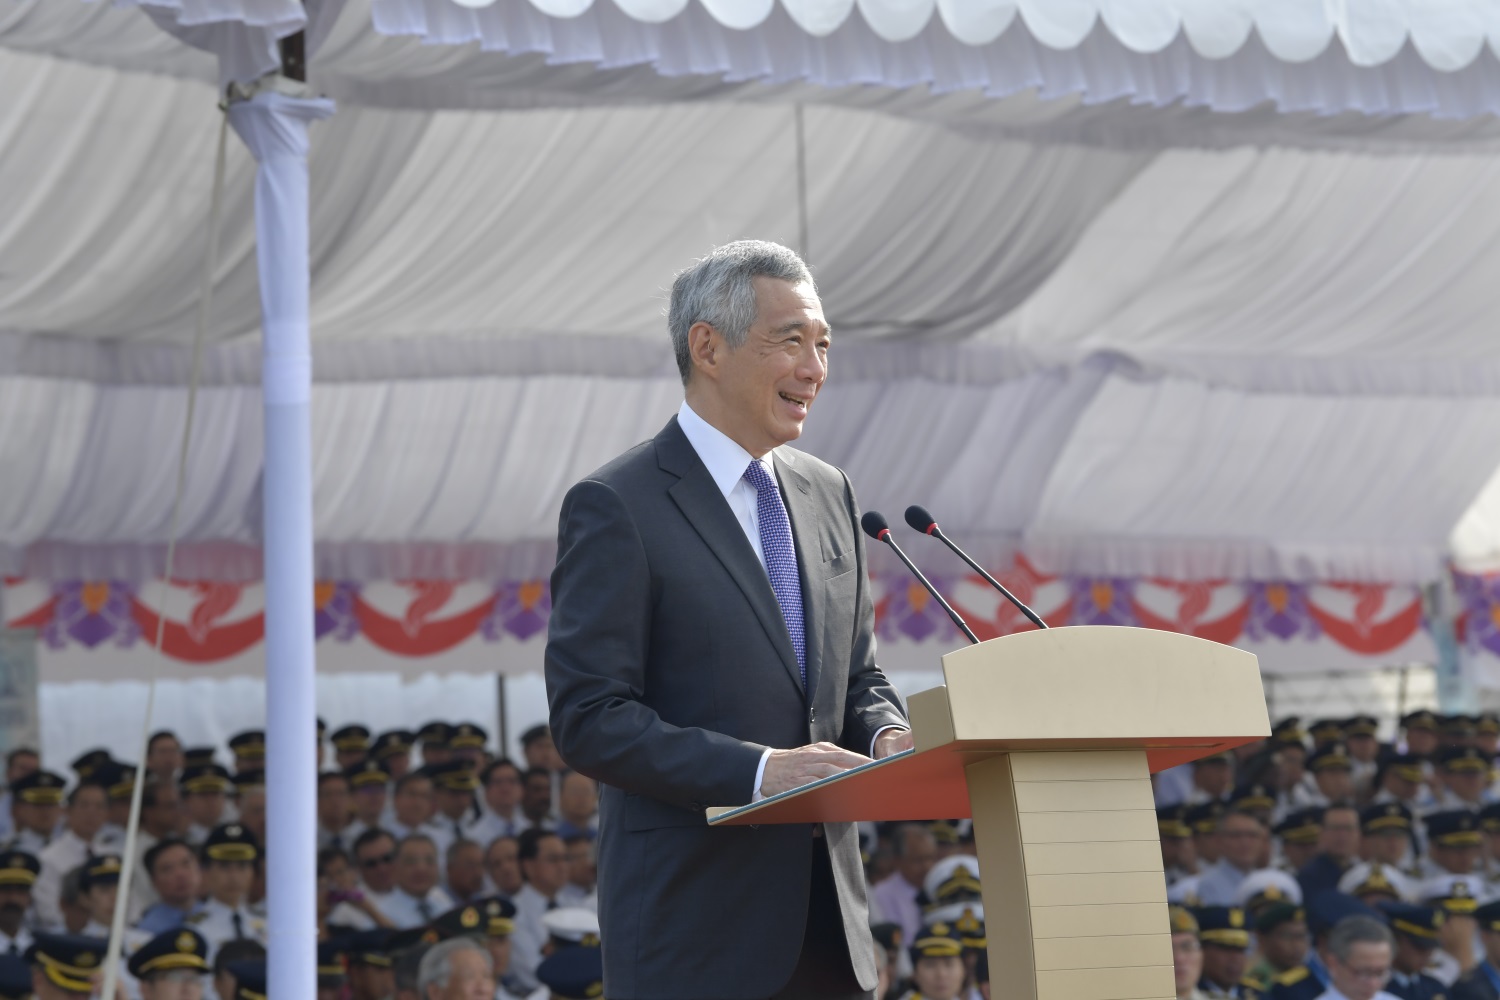 RSAF must continue to attract the right people: PM Lee